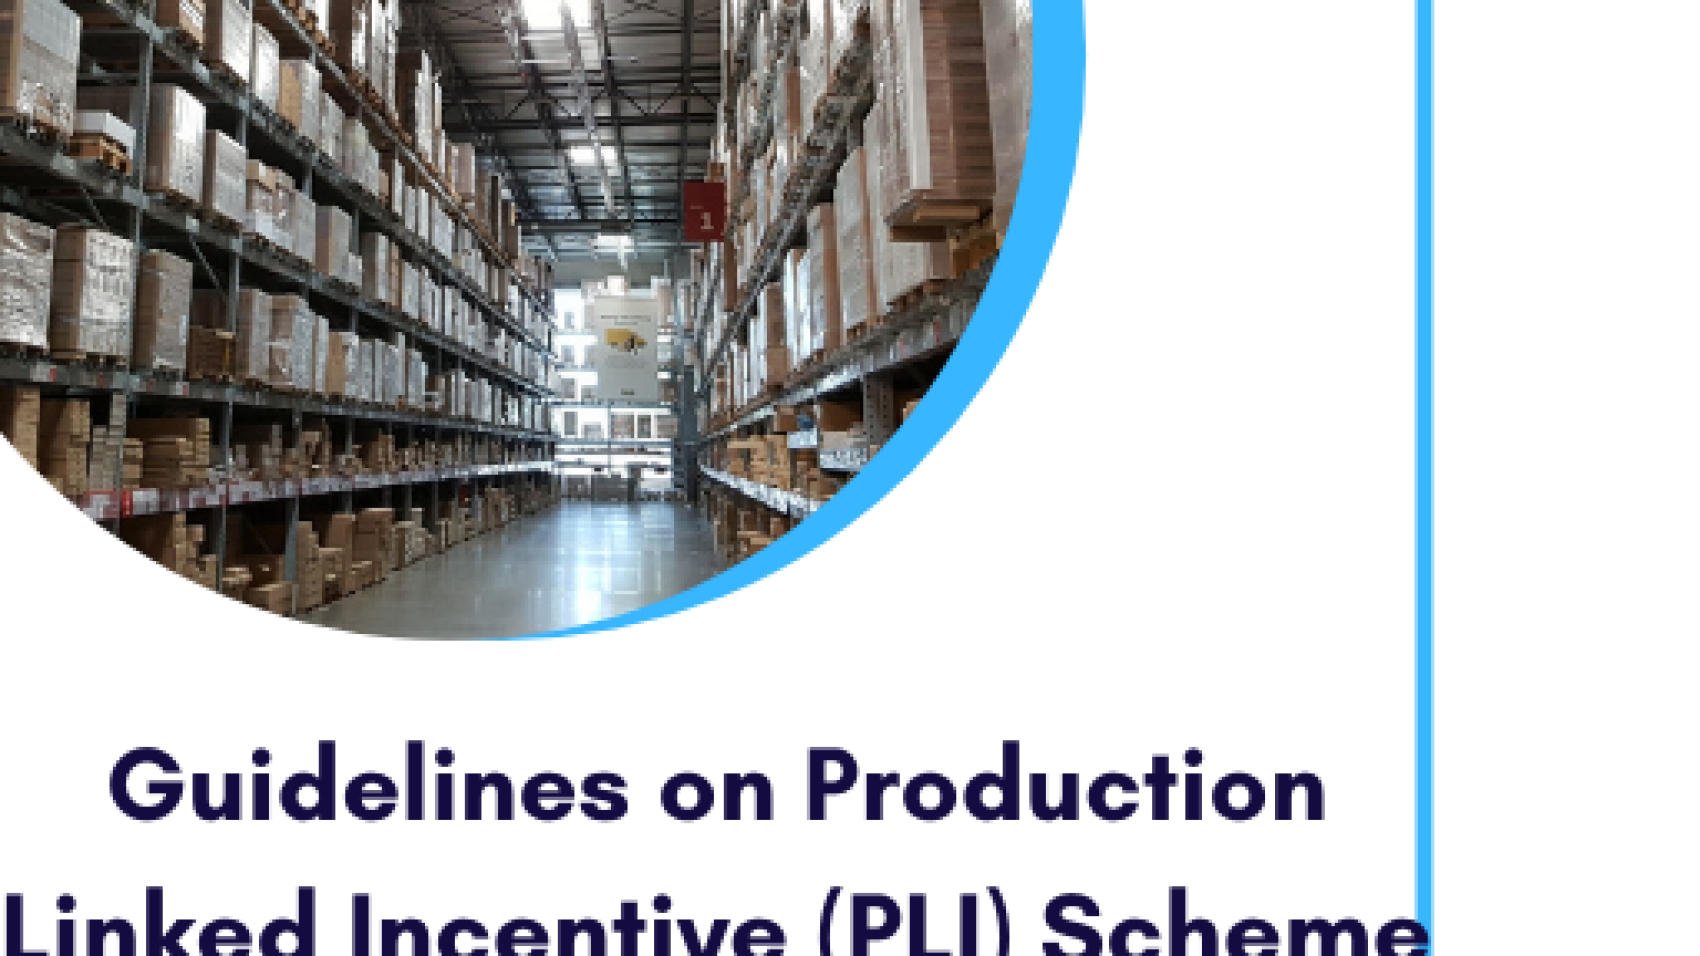 Guidelines on Production Linked Incentive (PLI) Scheme for Food Processing Industry